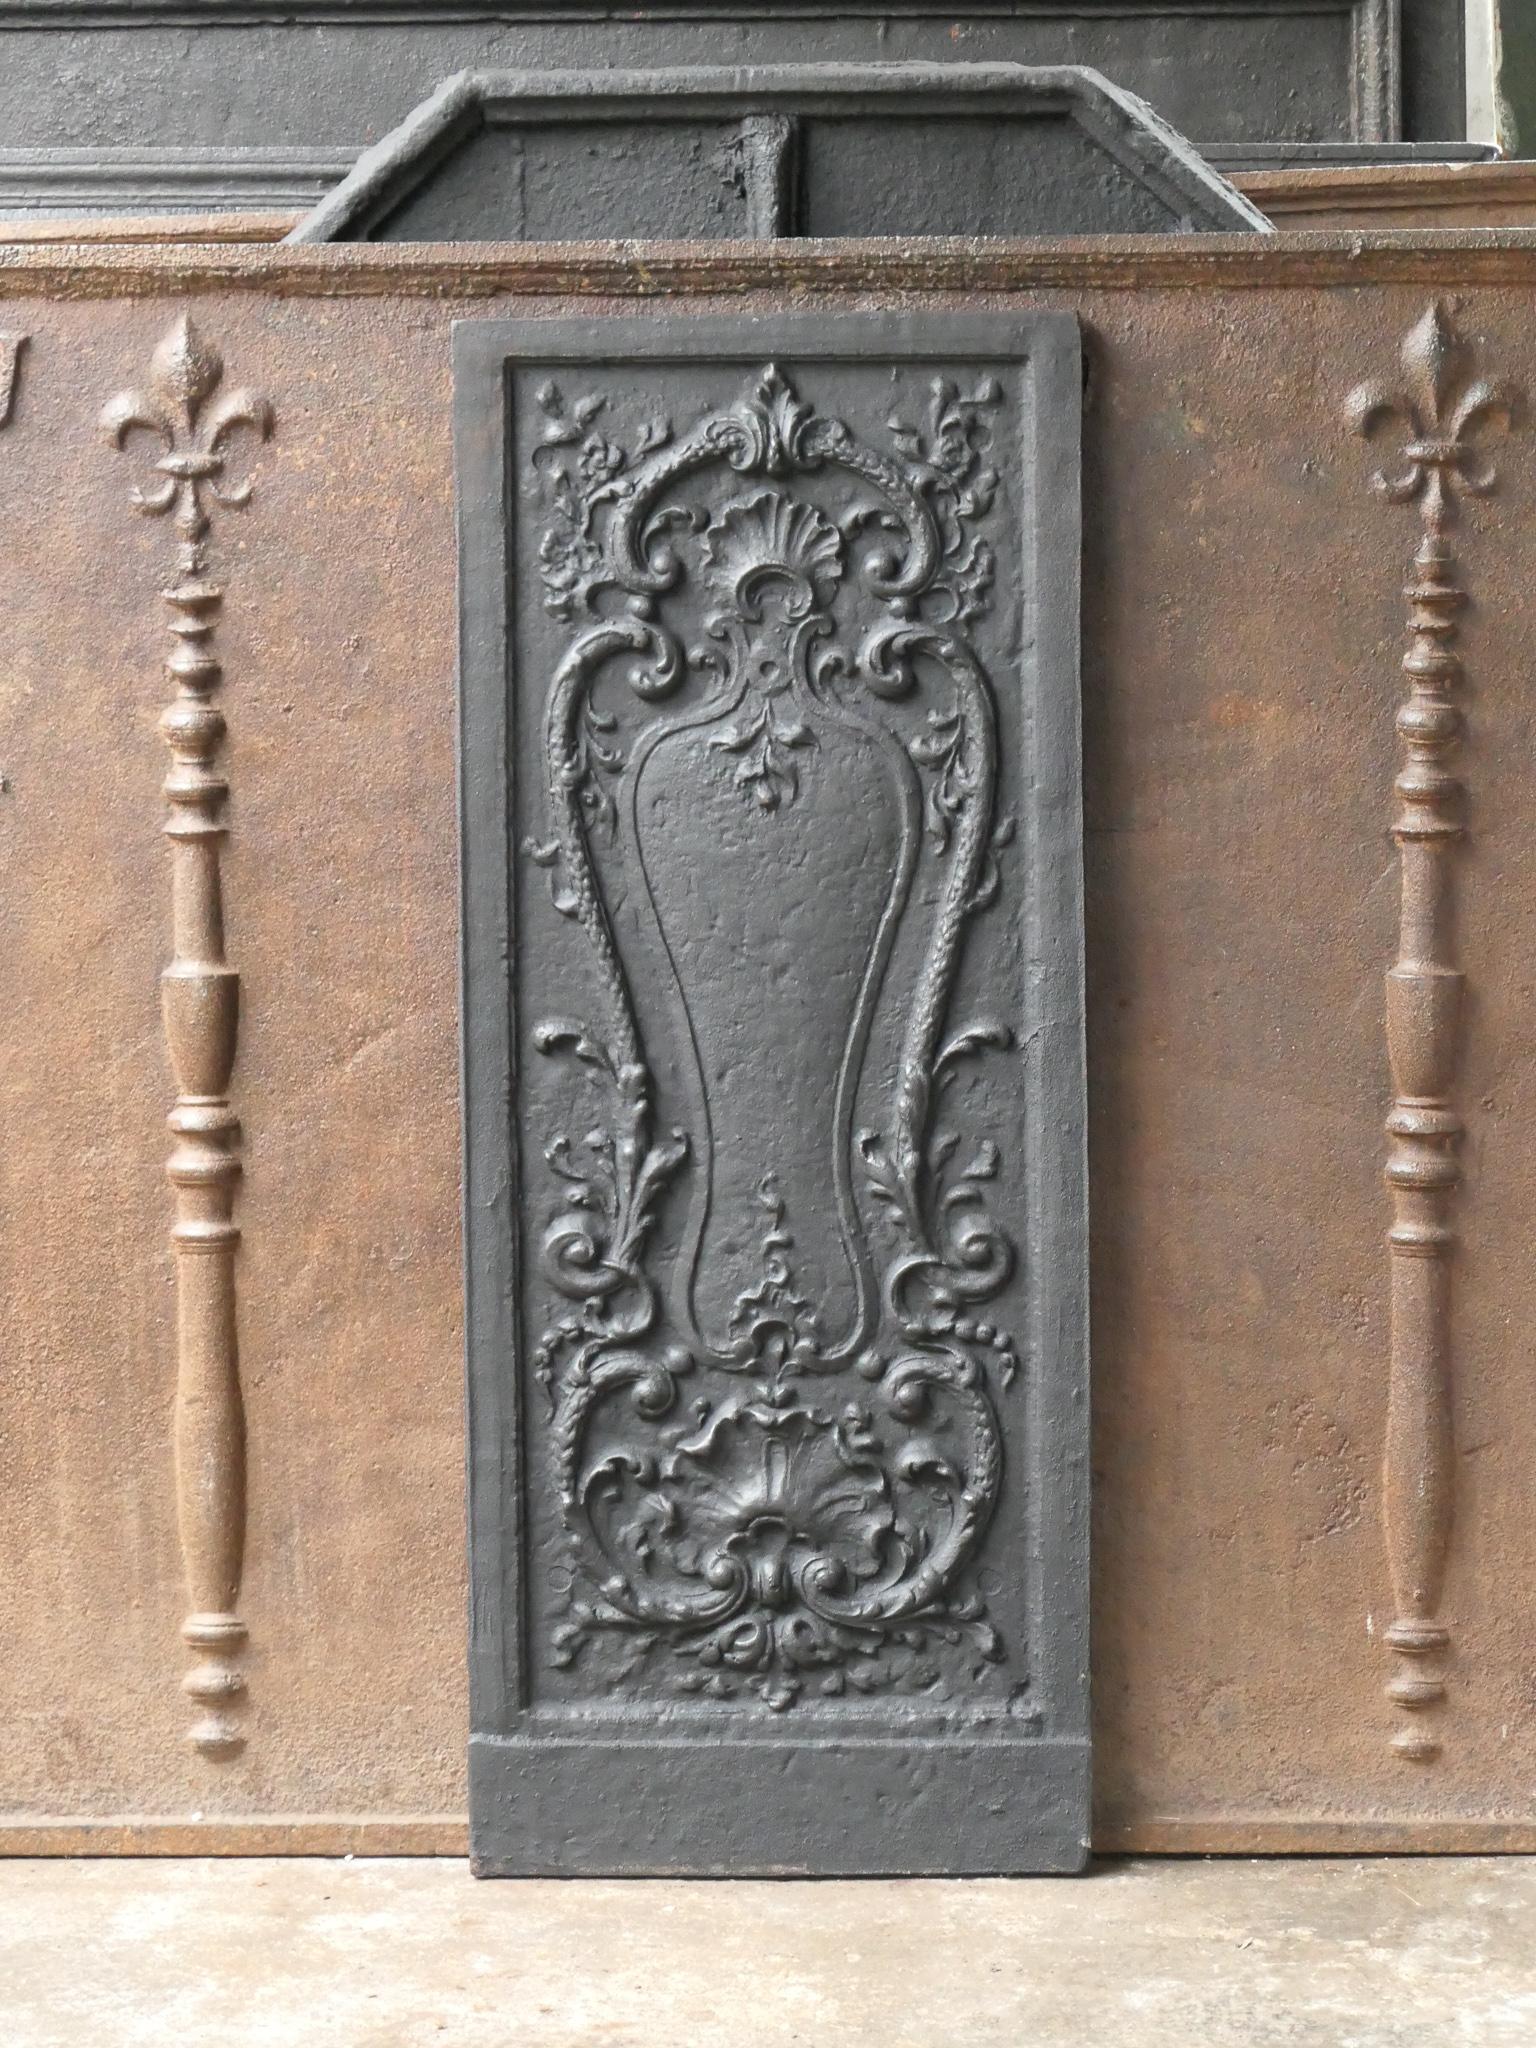 20th century French Louis XV style fireback. The fireback is made of cast iron and has a black / pewter patina. The condition is good, no cracks.